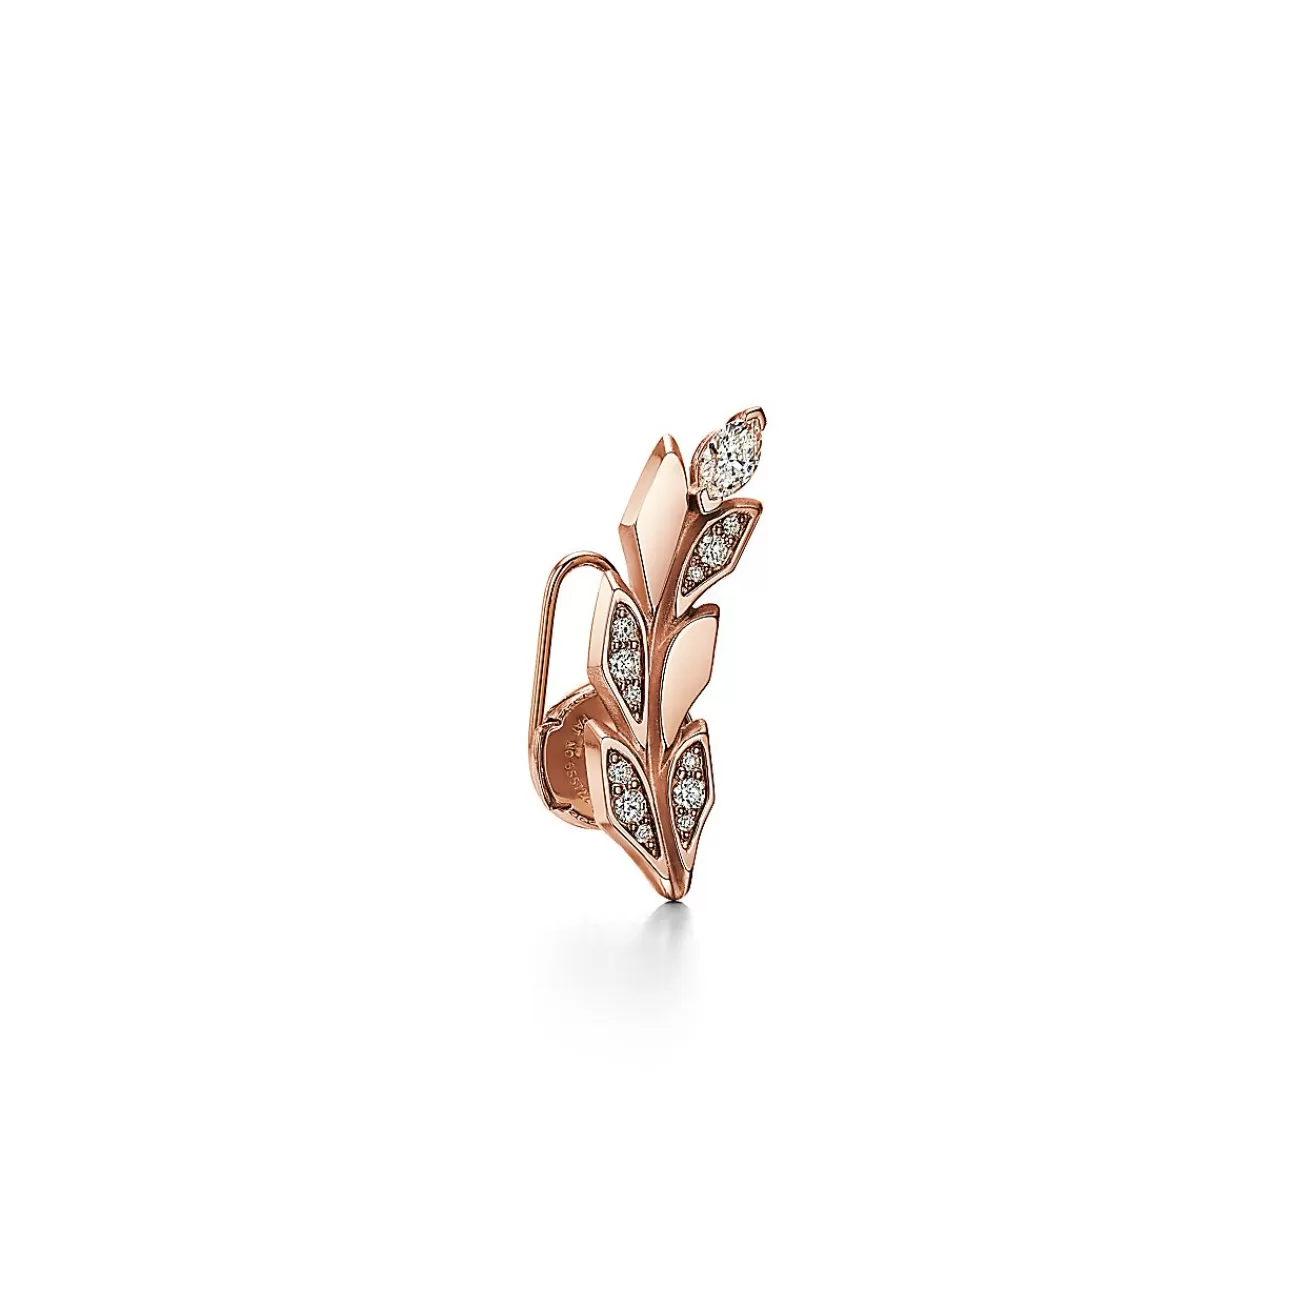 Tiffany & Co. Tiffany Victoria® Vine Climber Earrings in Rose Gold with Diamonds | ^ Earrings | Gifts for Her